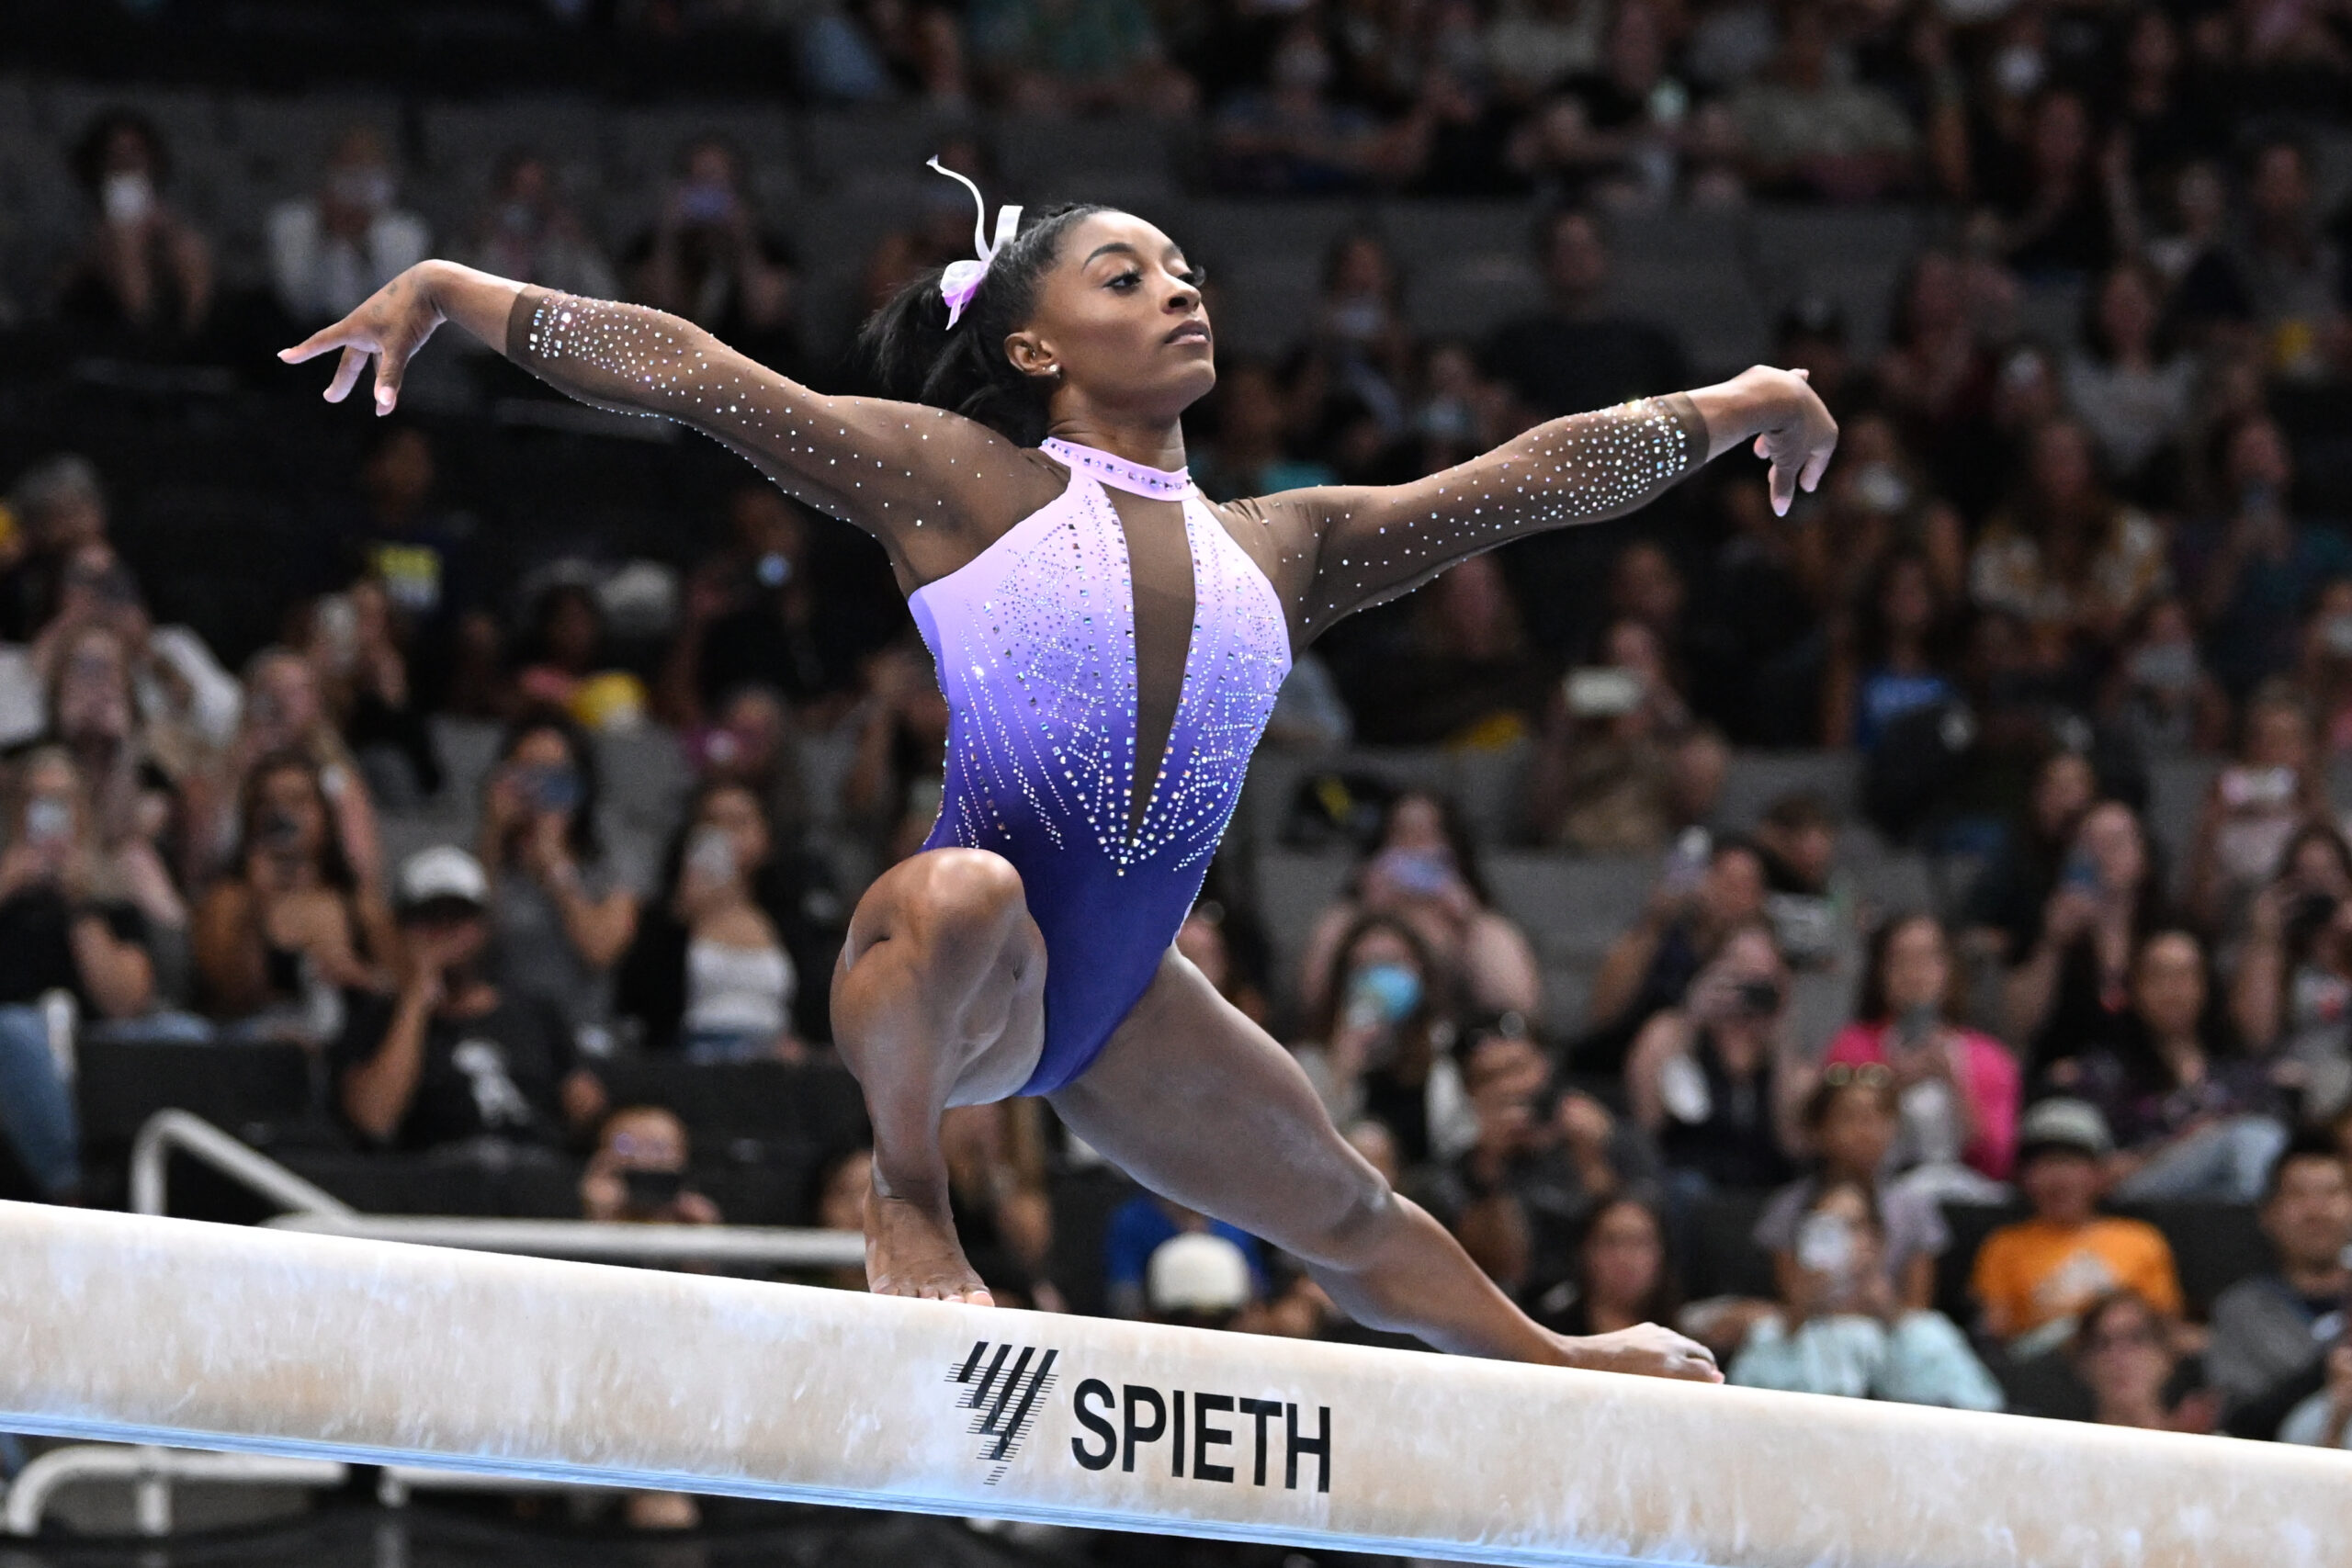 Simone Biles on beam during Day 1 of senior women's competition at the 2023 Xfinity U.S. Gymnastics Championships.